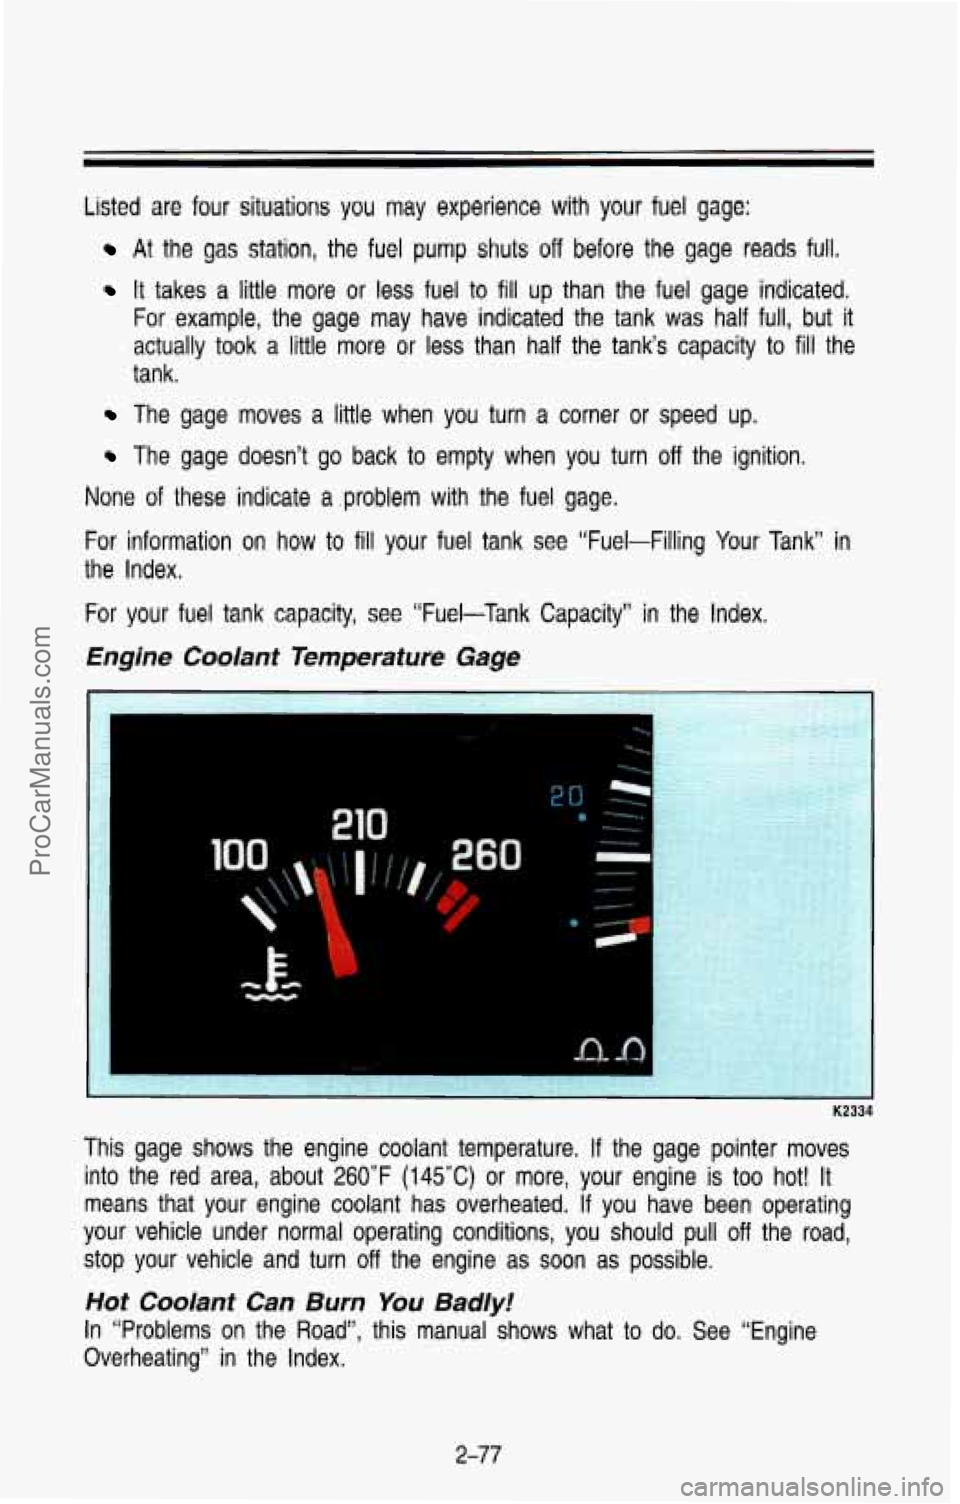 CHEVROLET SUBURBAN 1993  Owners Manual Listed are  four  situations  you  may  experience  with  your  fuel gage: 
At the  gas  station,  the  fuel  pump  shuts off before  the gage reads  full. 
It takes  a  little more  or  less  fuel  t